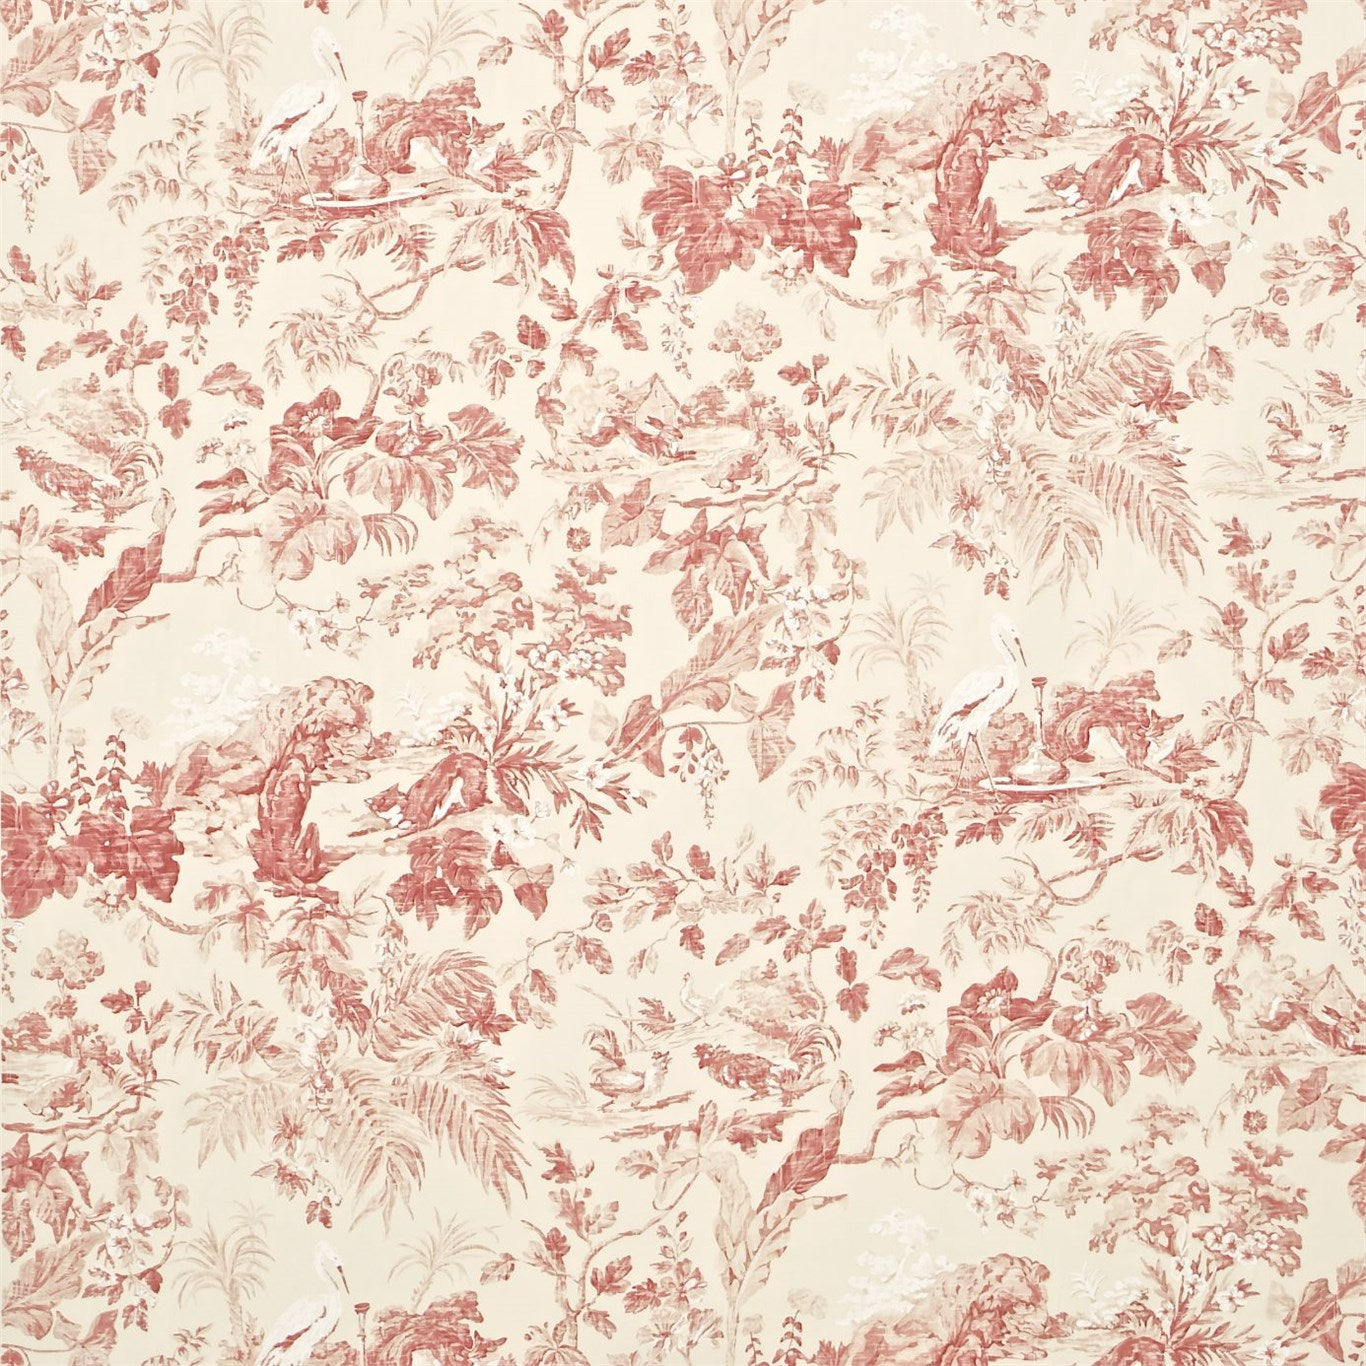 Aesops Fables Fabric by Sanderson - DCAVAE201 - Pink